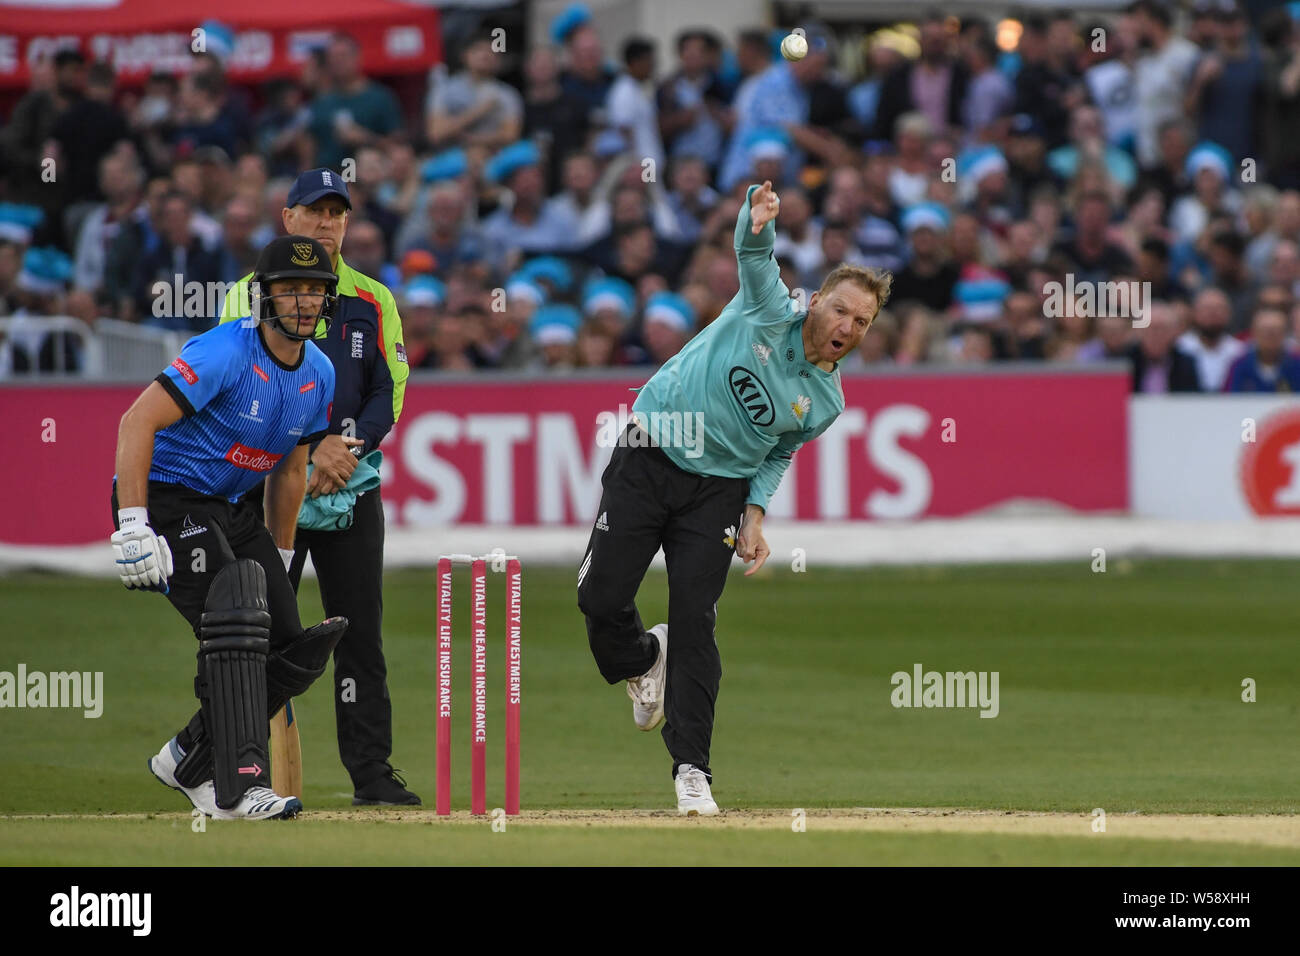 Hove, UK. 26th July, 2019. 26th July 2019, Central County Ground, Hove; Vitality Blast 2019 T20, Sussex Sharks vs Surrey ; gareth batty of surrey Bowles out Laurie Evans of Sussex Credit: Phil Westlake/News Images Credit: News Images /Alamy Live News Stock Photo